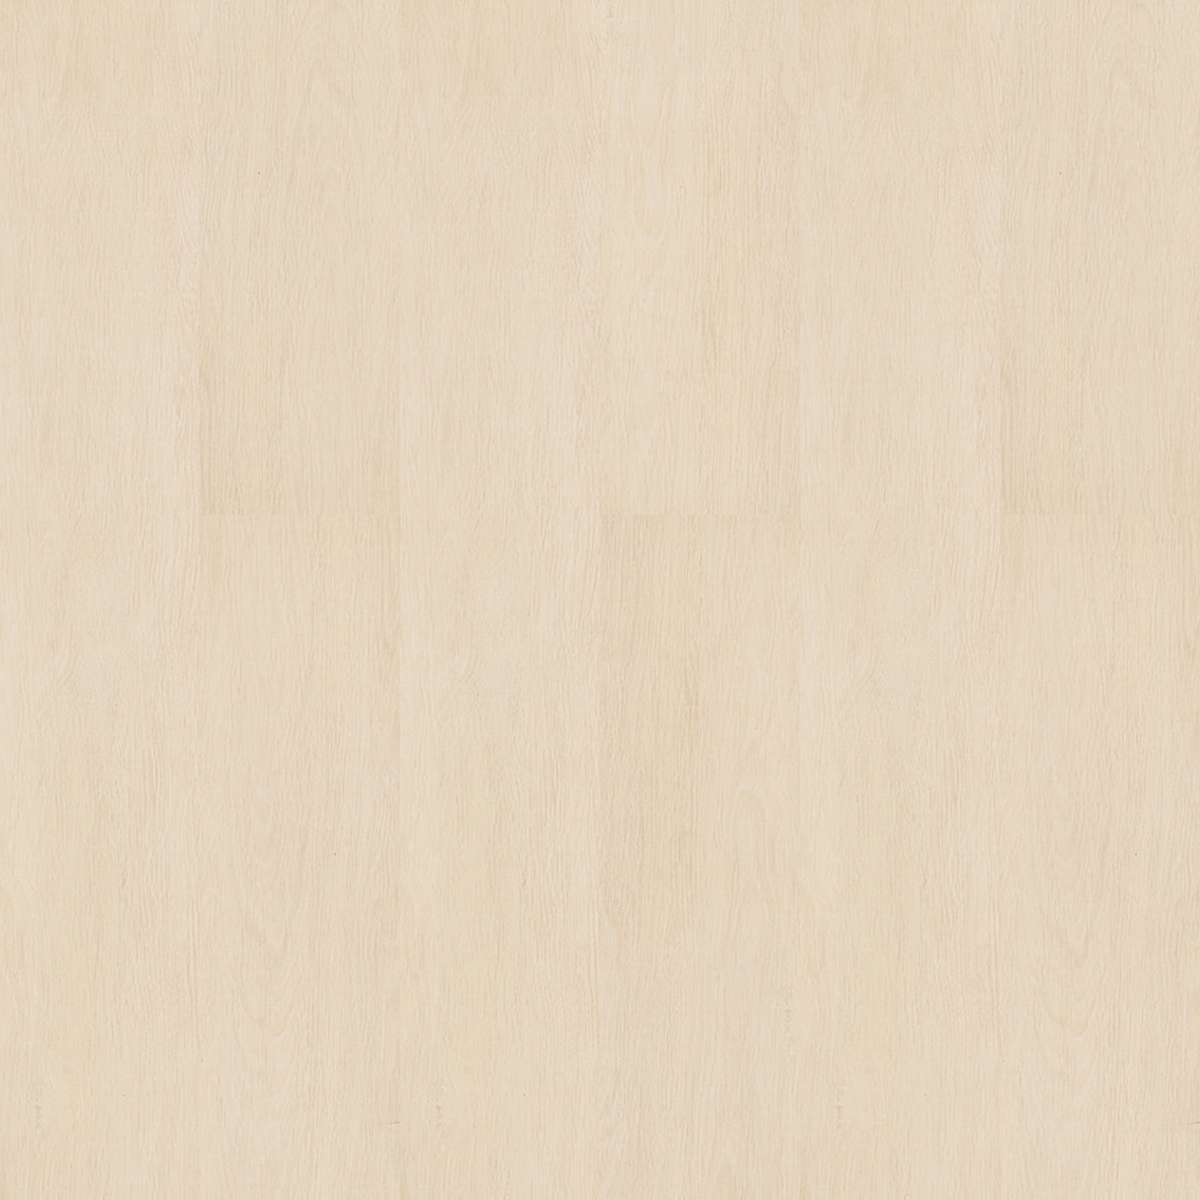 Wise wood Inspire 700 Contempo ivory